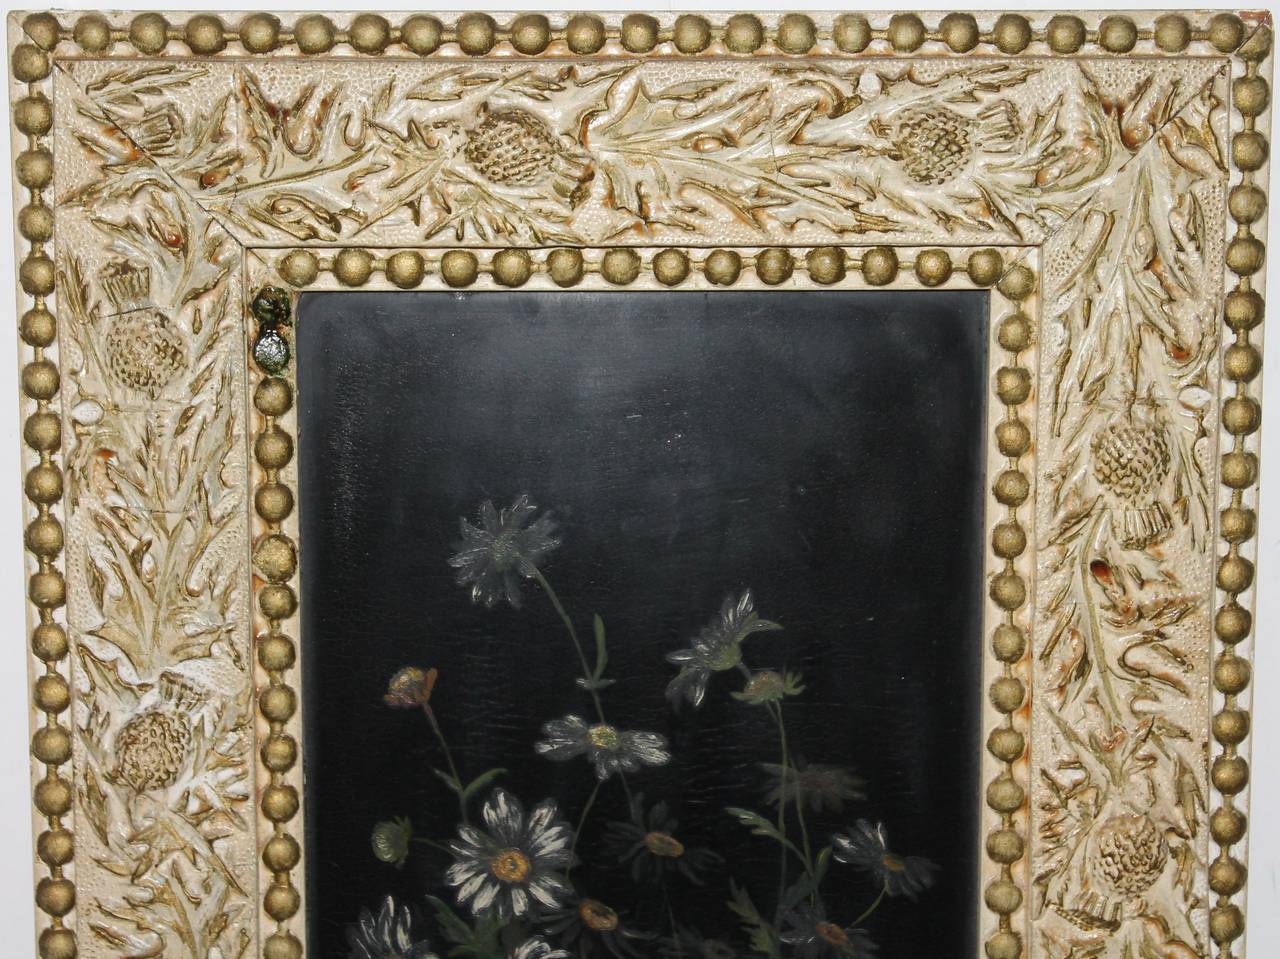 19th century Victorian oil painting on board. This Folk Art casing is the original casing with original paint. This oil painting is in pristine condition and has minor wear. This is a painting on original black painted board. The Folk Art frame